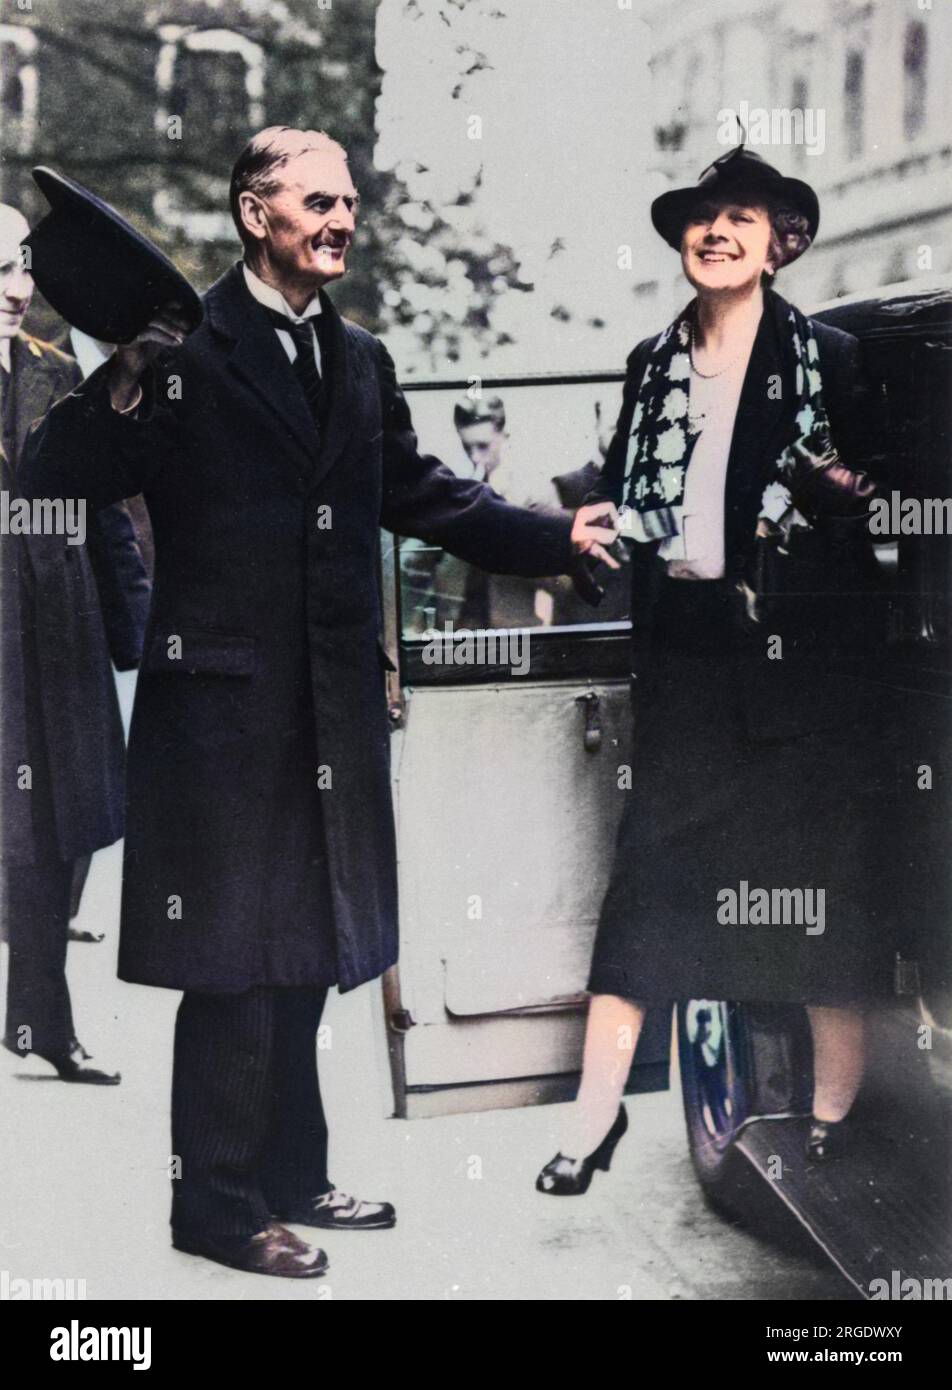 Neville Chamberlain helping his wife out of a car. British Prime Minister. Stock Photo